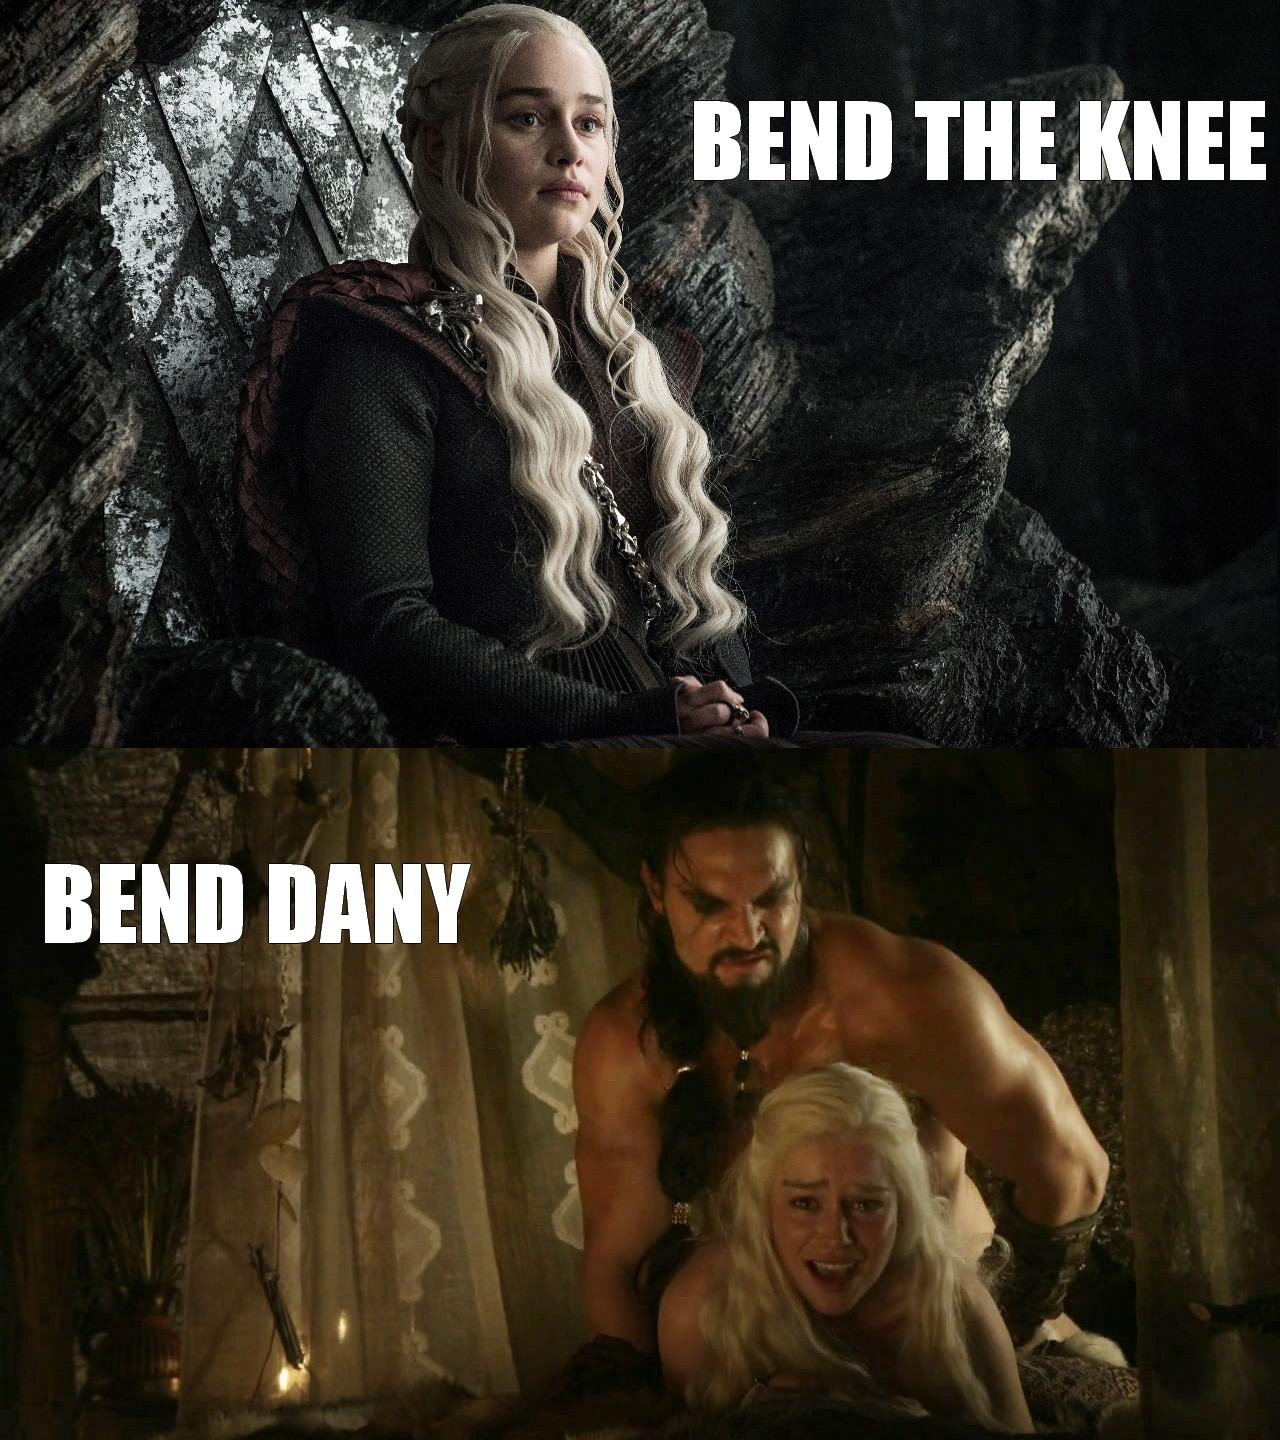 When She Said “Bend The Knee” But You Misheard Her